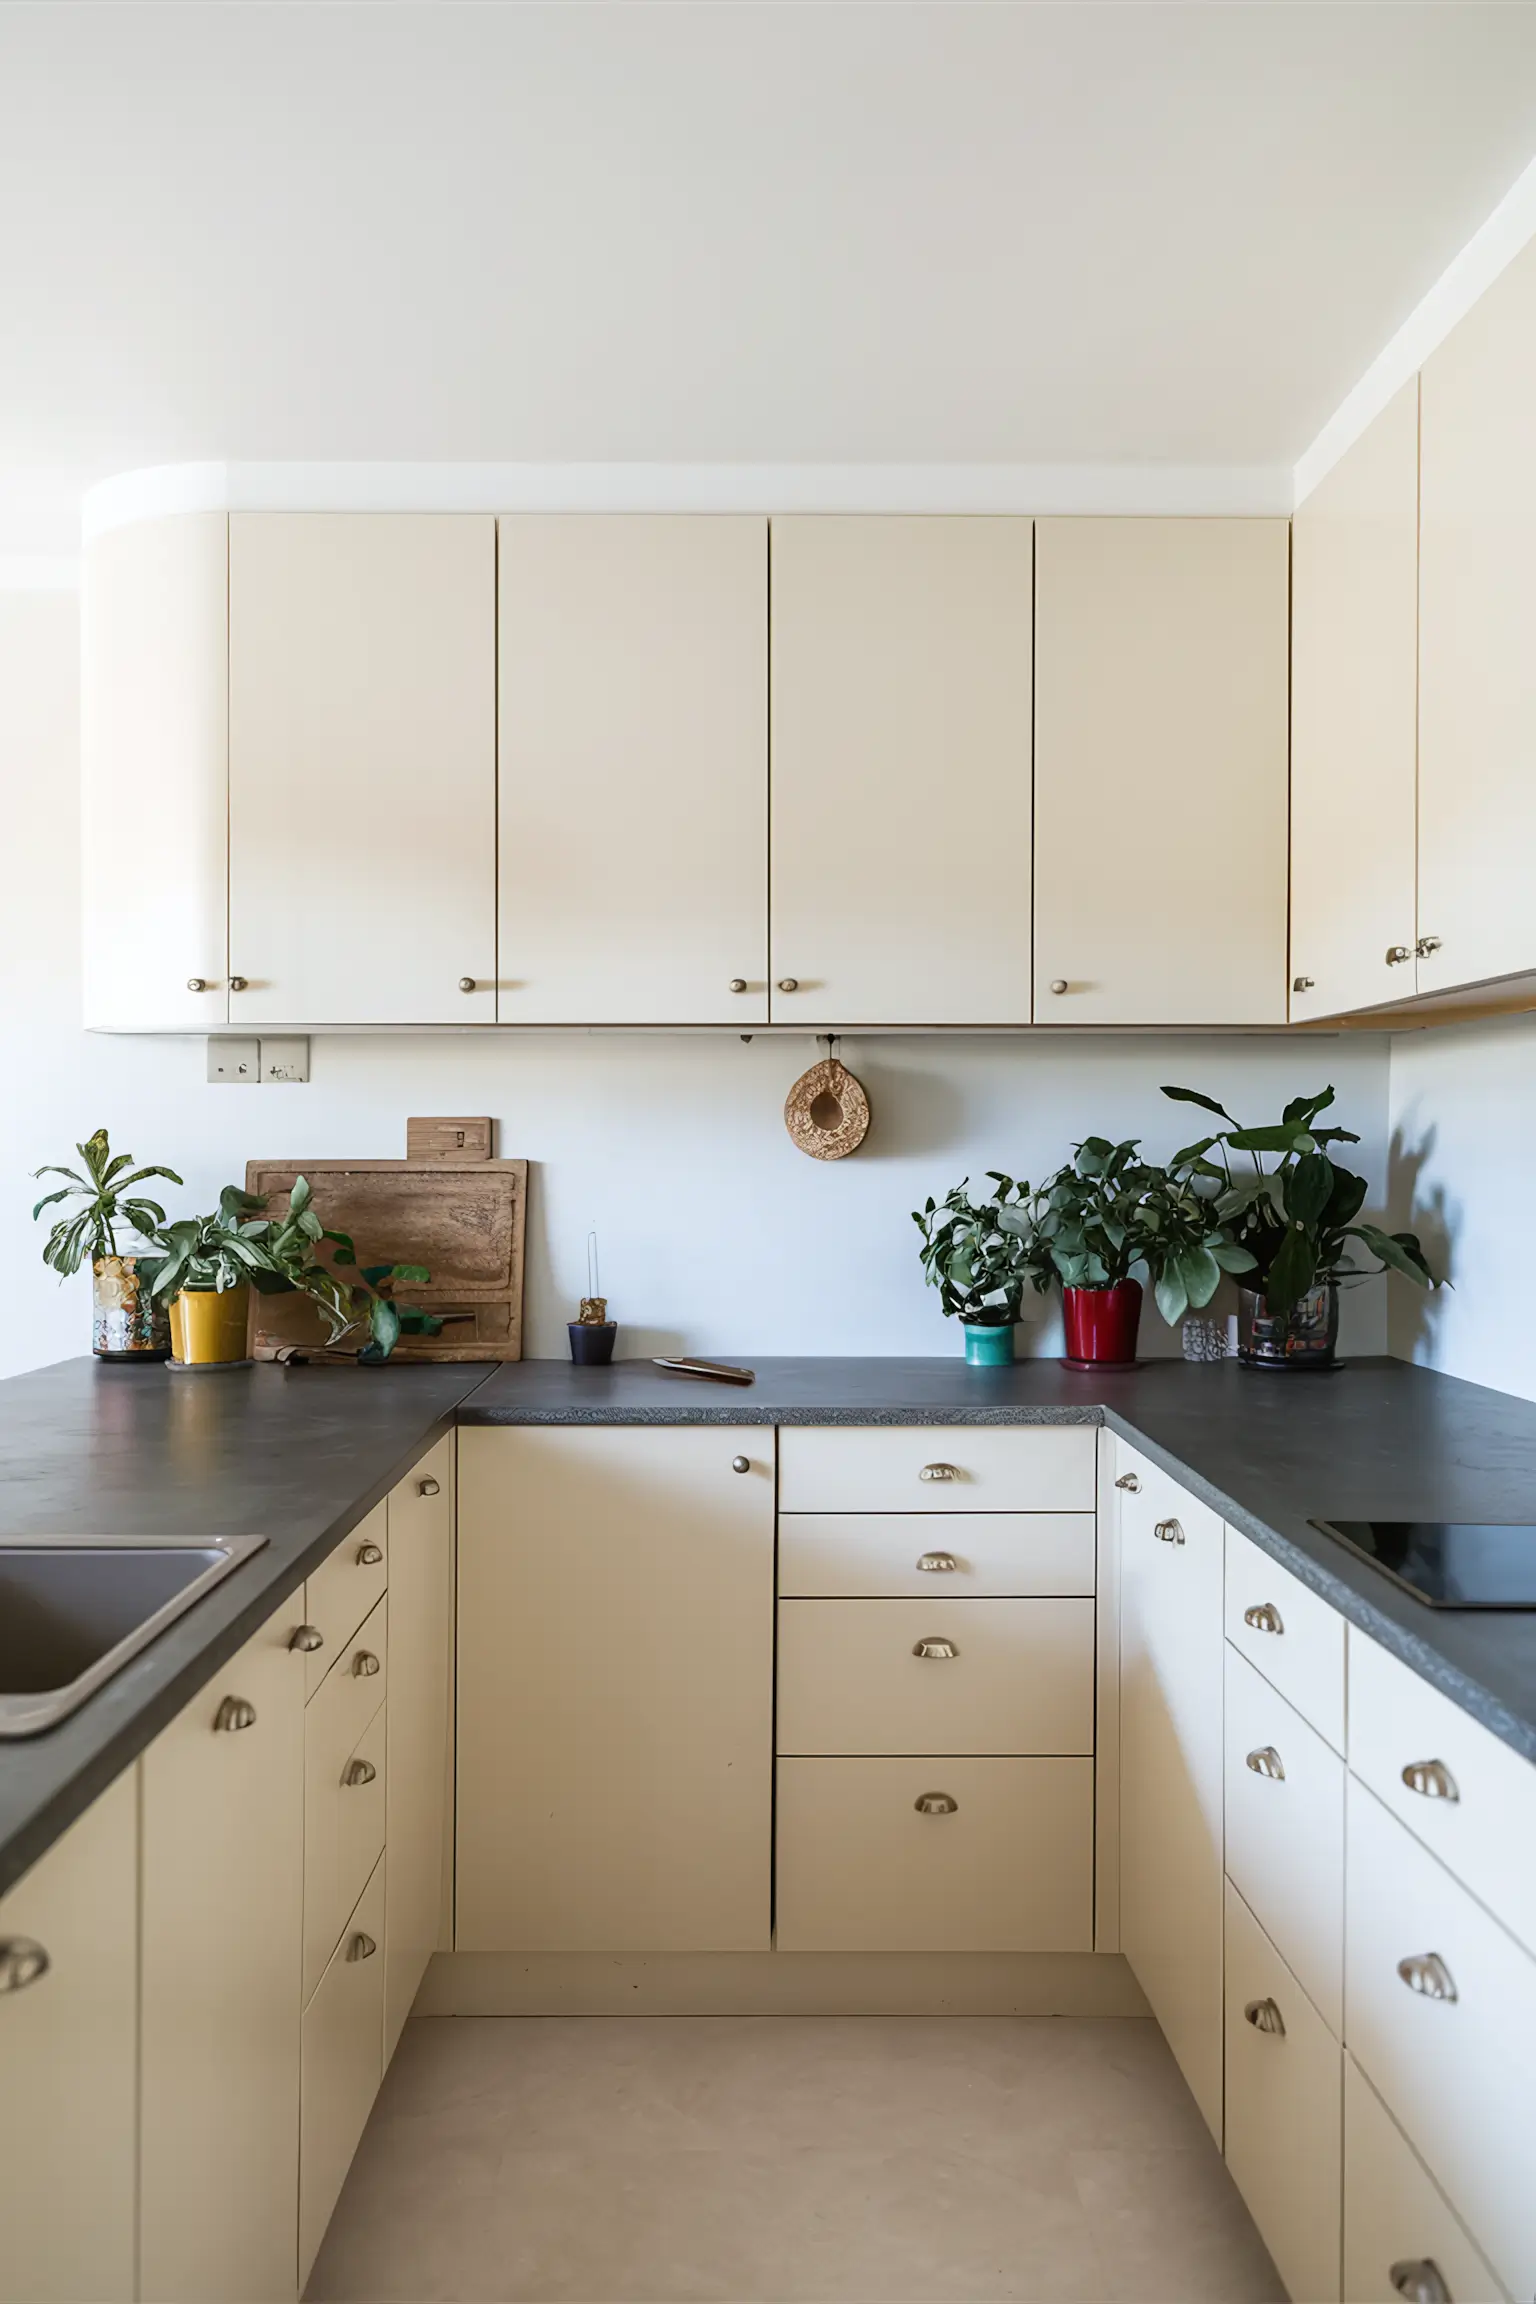 Minimalistic budget-friendly kitchen makeover with painted cabinets and DIY decor.